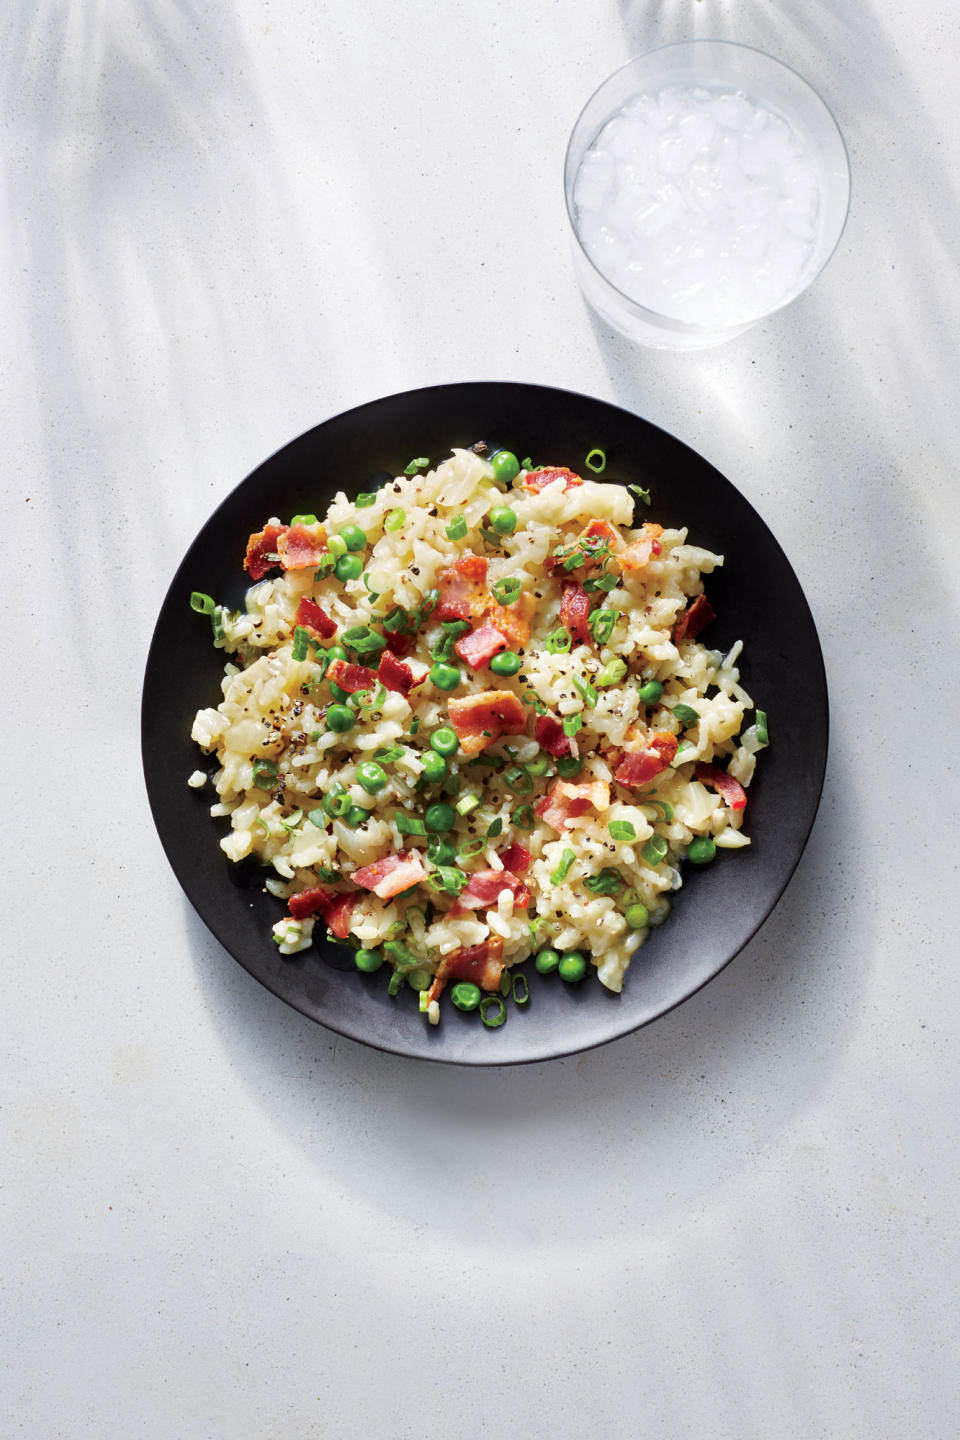 Tuesday: White Cheddar and Bacon Risotto